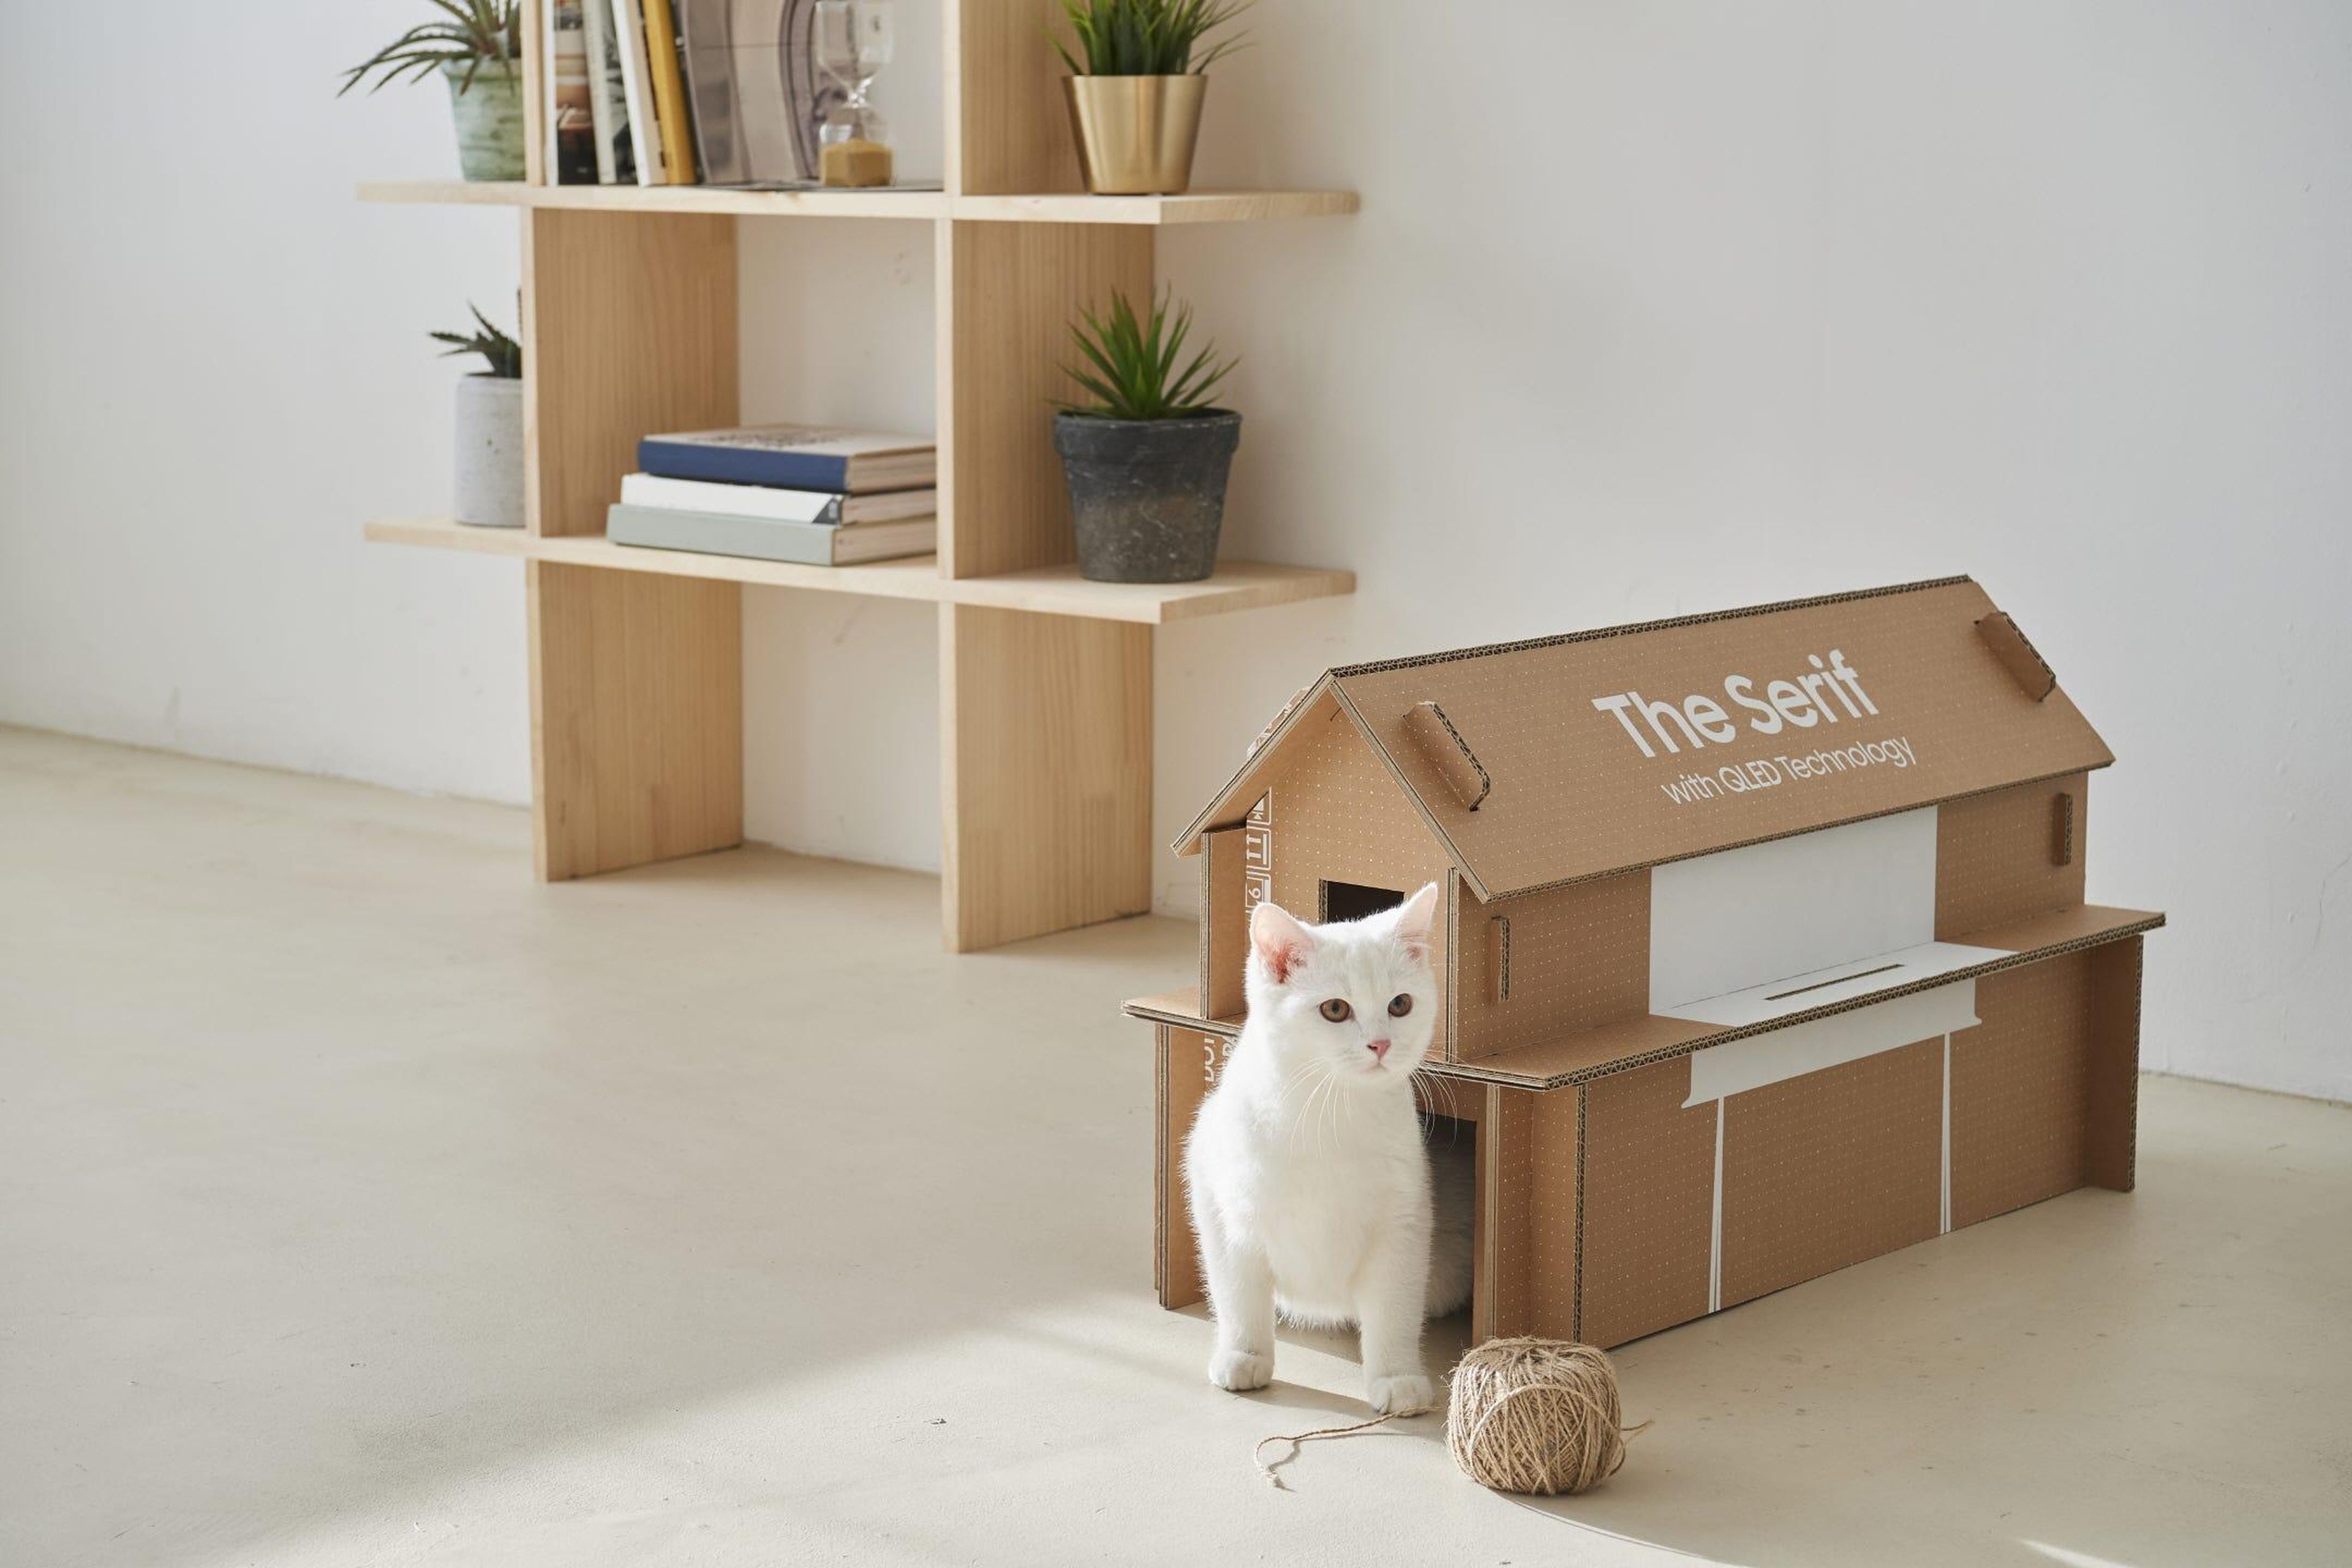 Samsung redesigned the packaging of its luxury TVs so the boxes can be turned into cardboard cat houses and books racks